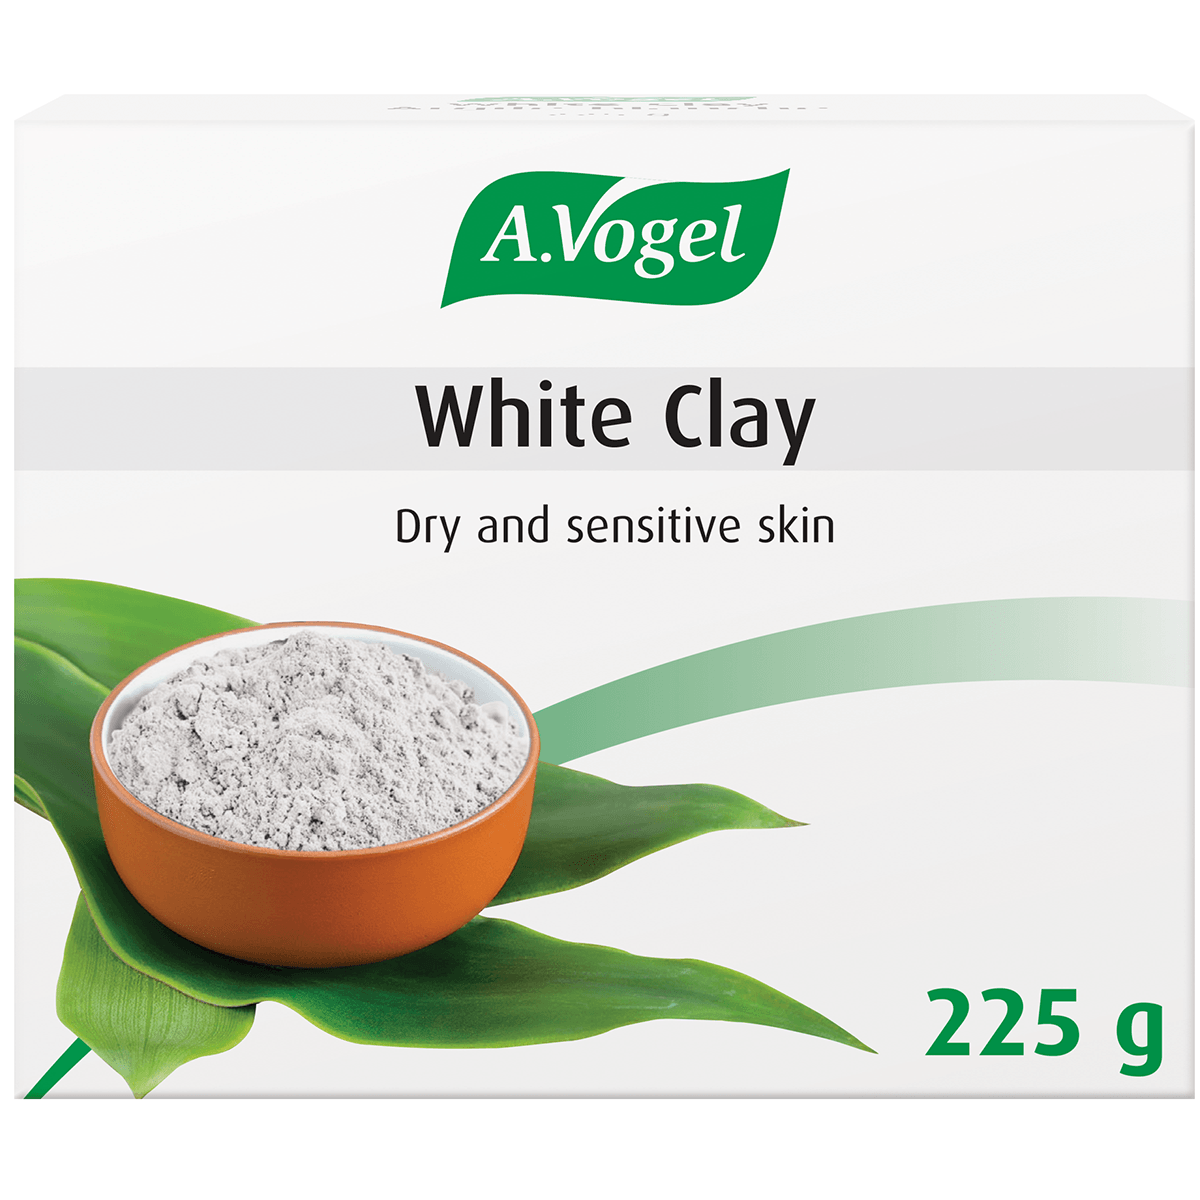 A. Vogel White Clay 225g Face Mask at Village Vitamin Store